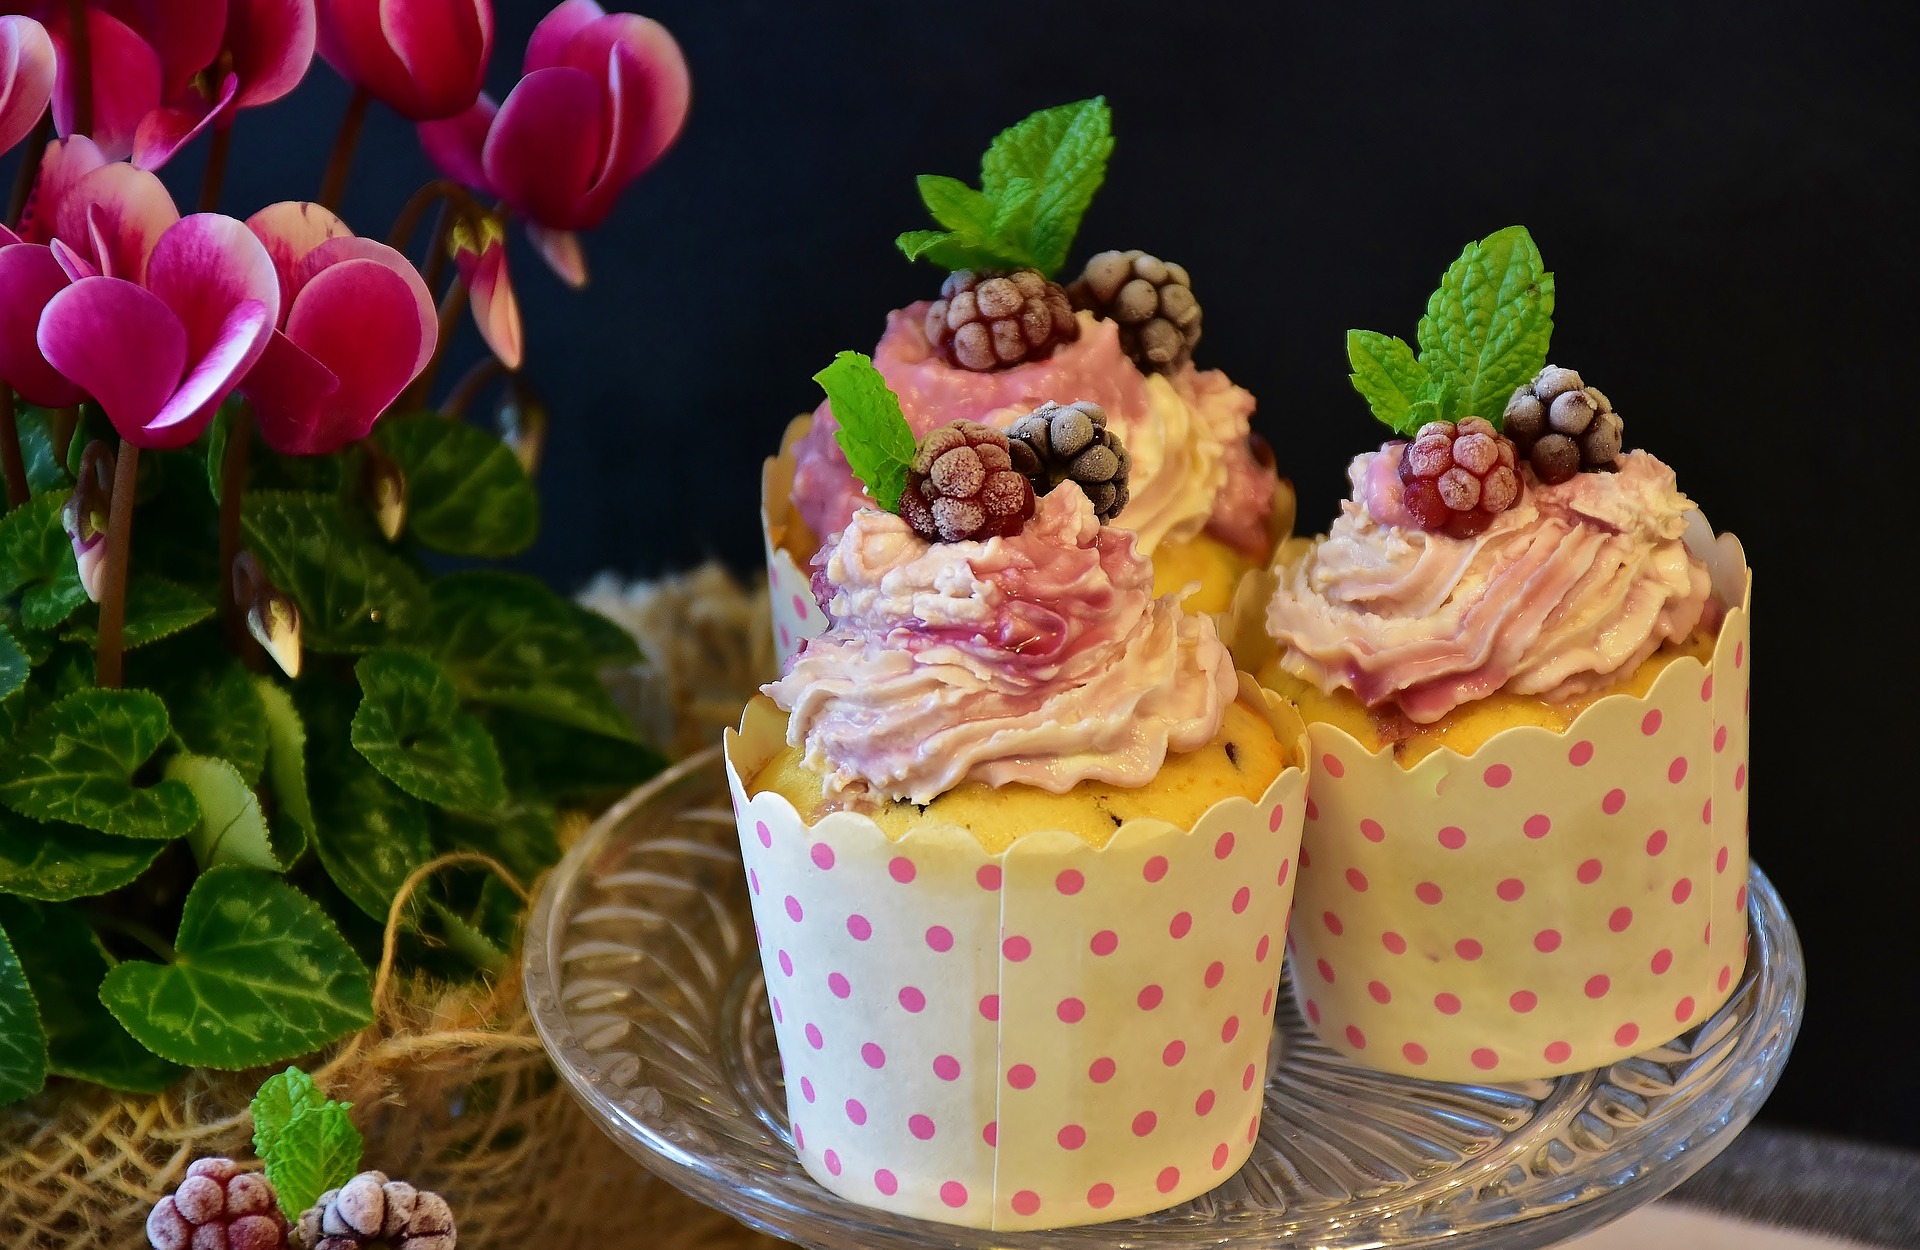 How to Prepare Cupcakes at Your Home and Generate Business?